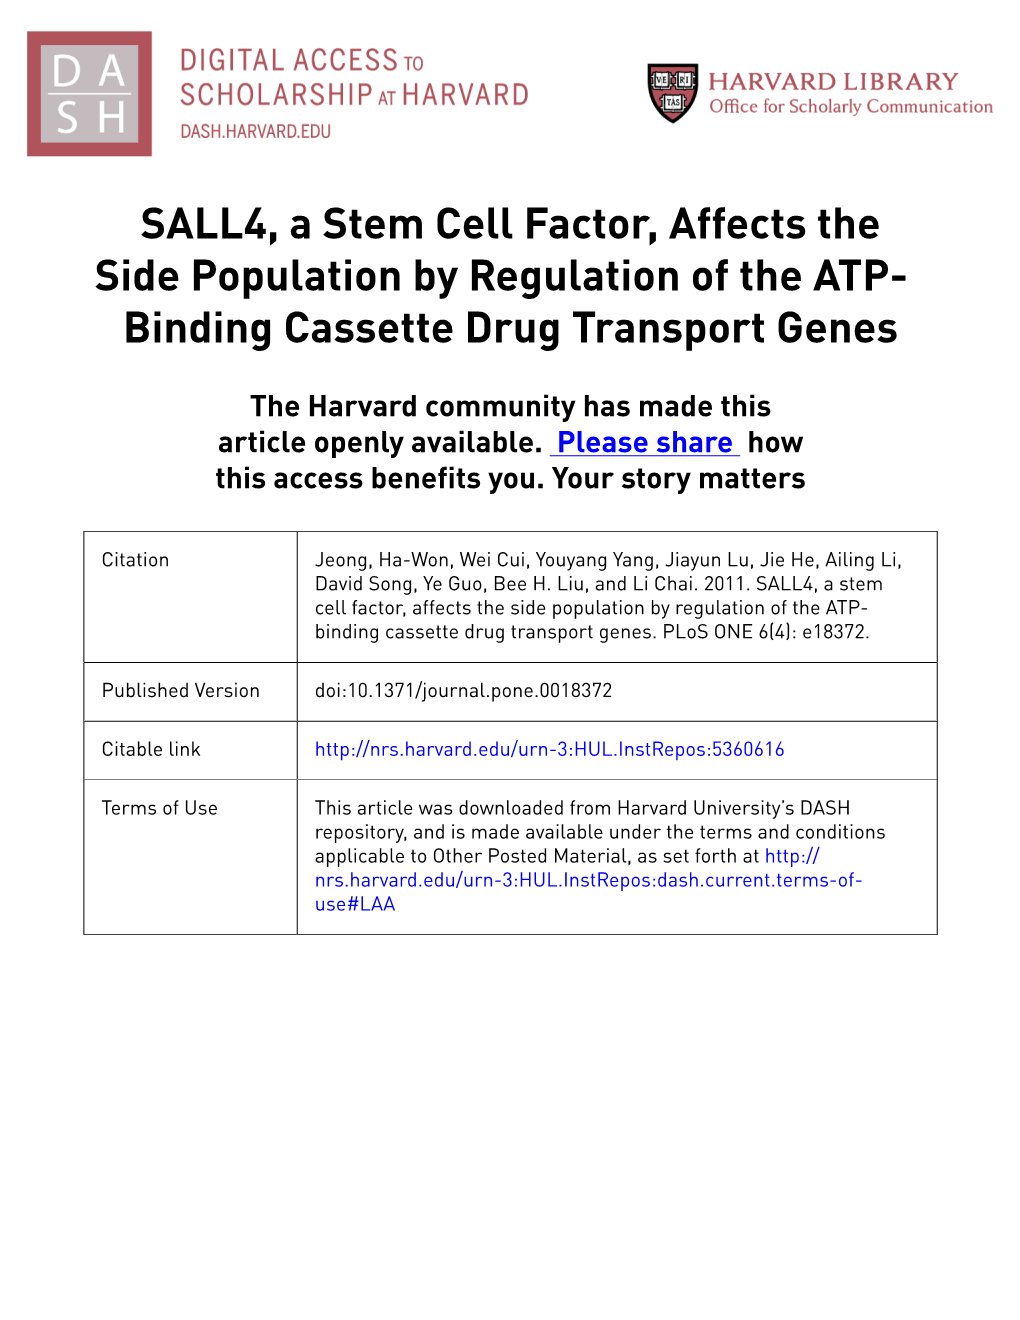 SALL4, a Stem Cell Factor, Affects the Side Population by Regulation of the ATP- Binding Cassette Drug Transport Genes